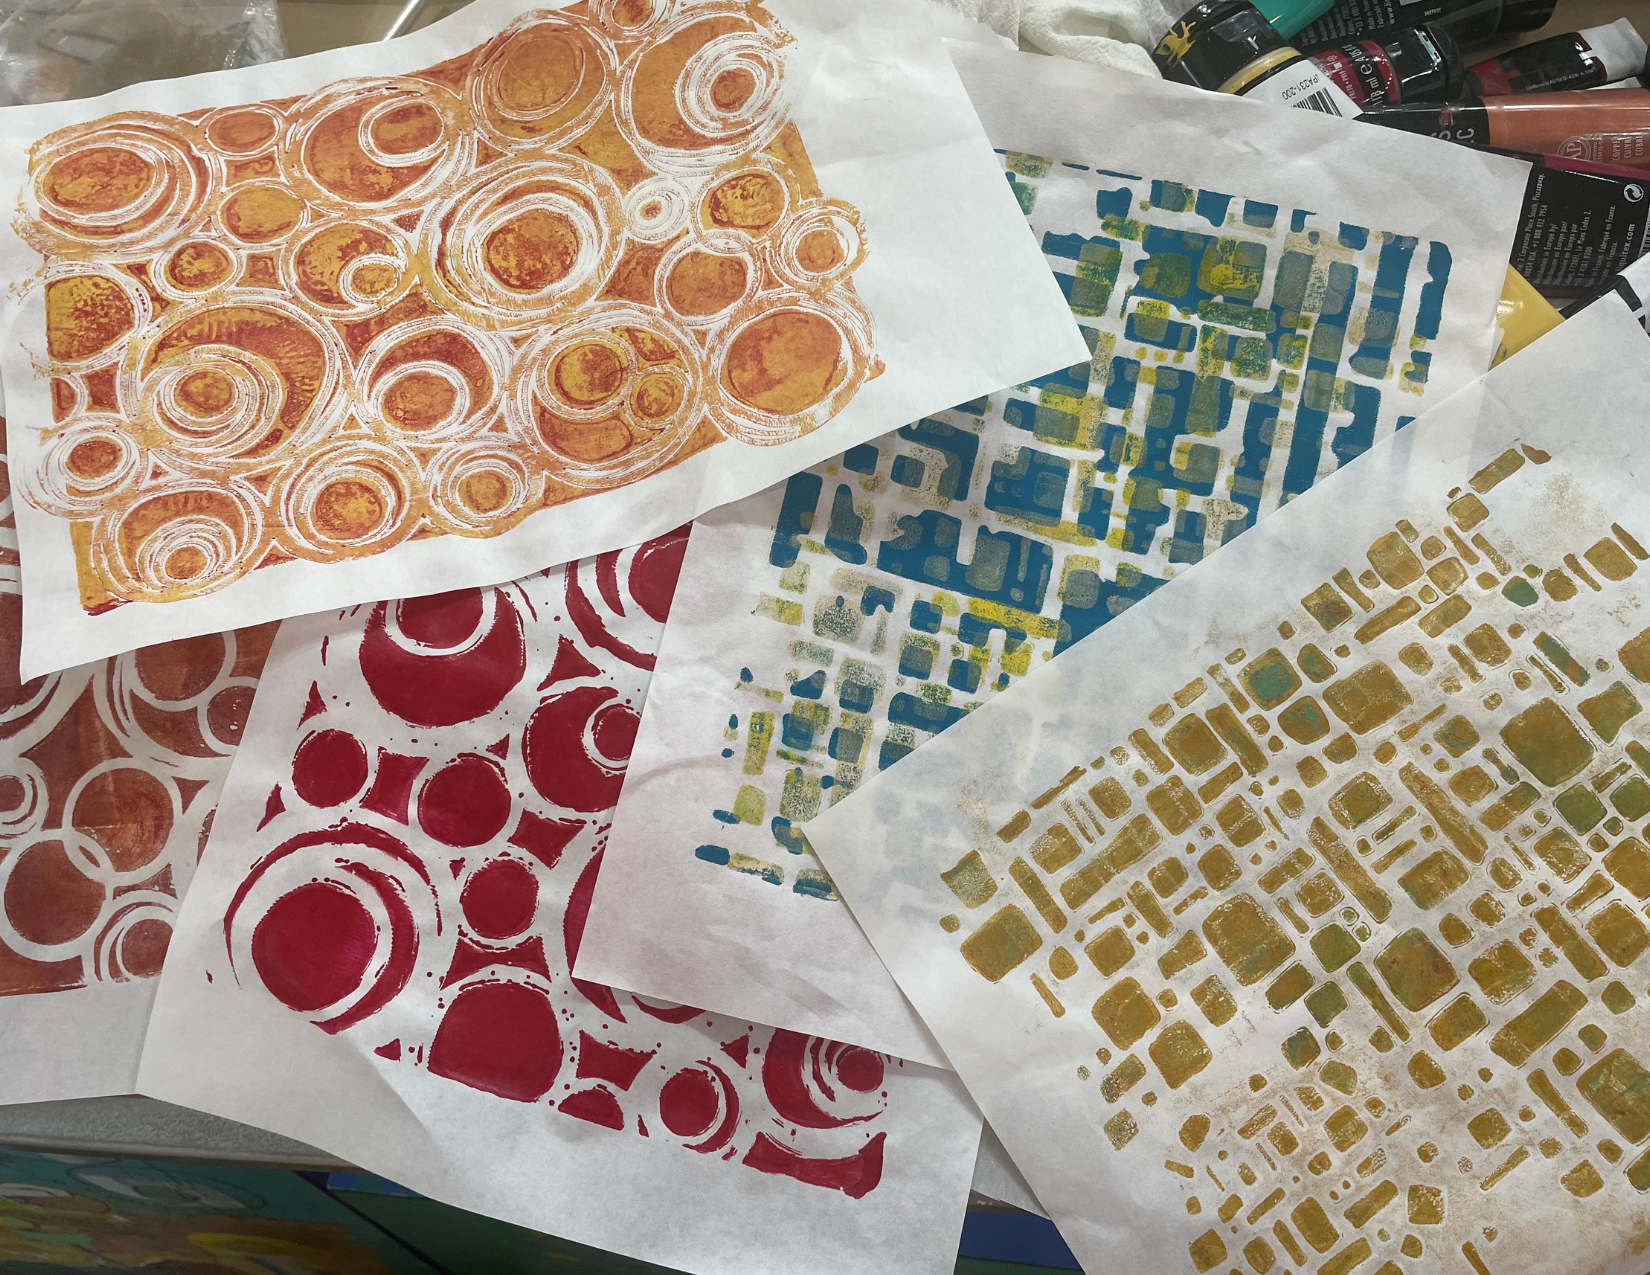 Gelli Jam: The Art of Gel Printing for Collage & More with Michelle  Hamilton - River Arts District Artists, gel printing